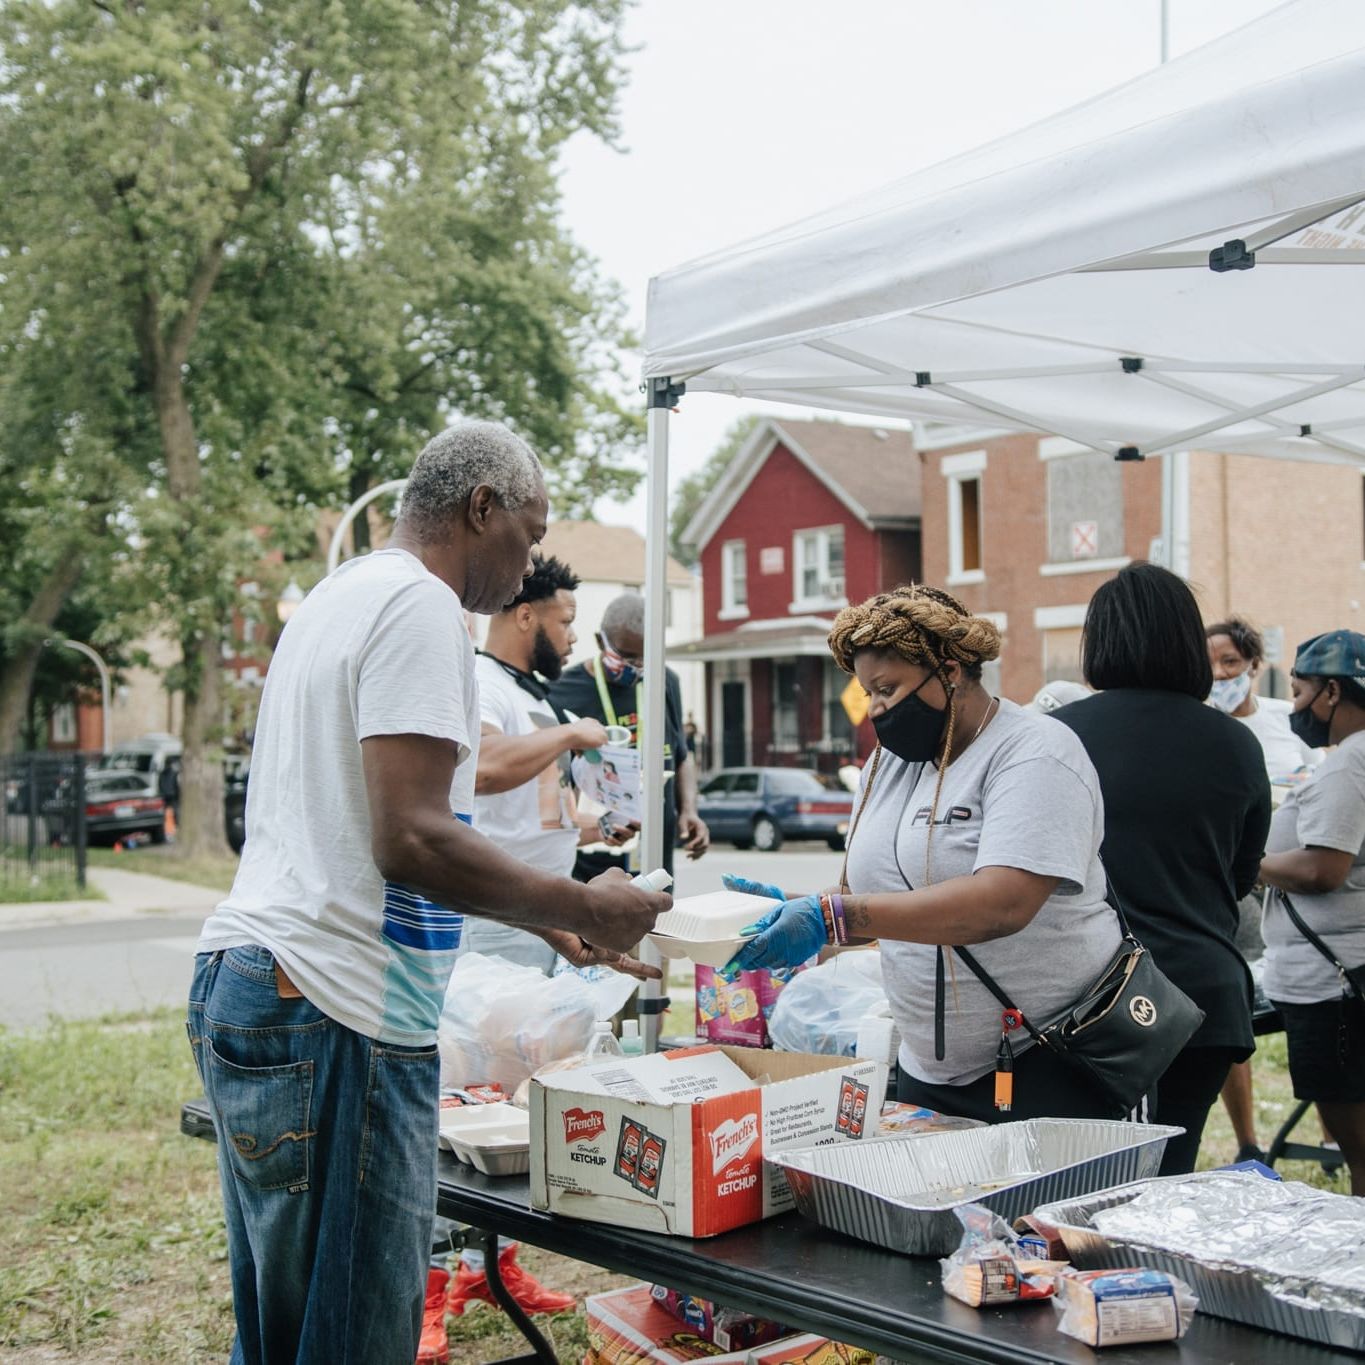 Violence prevention team organizes block party with neigbors in East Garfield Park